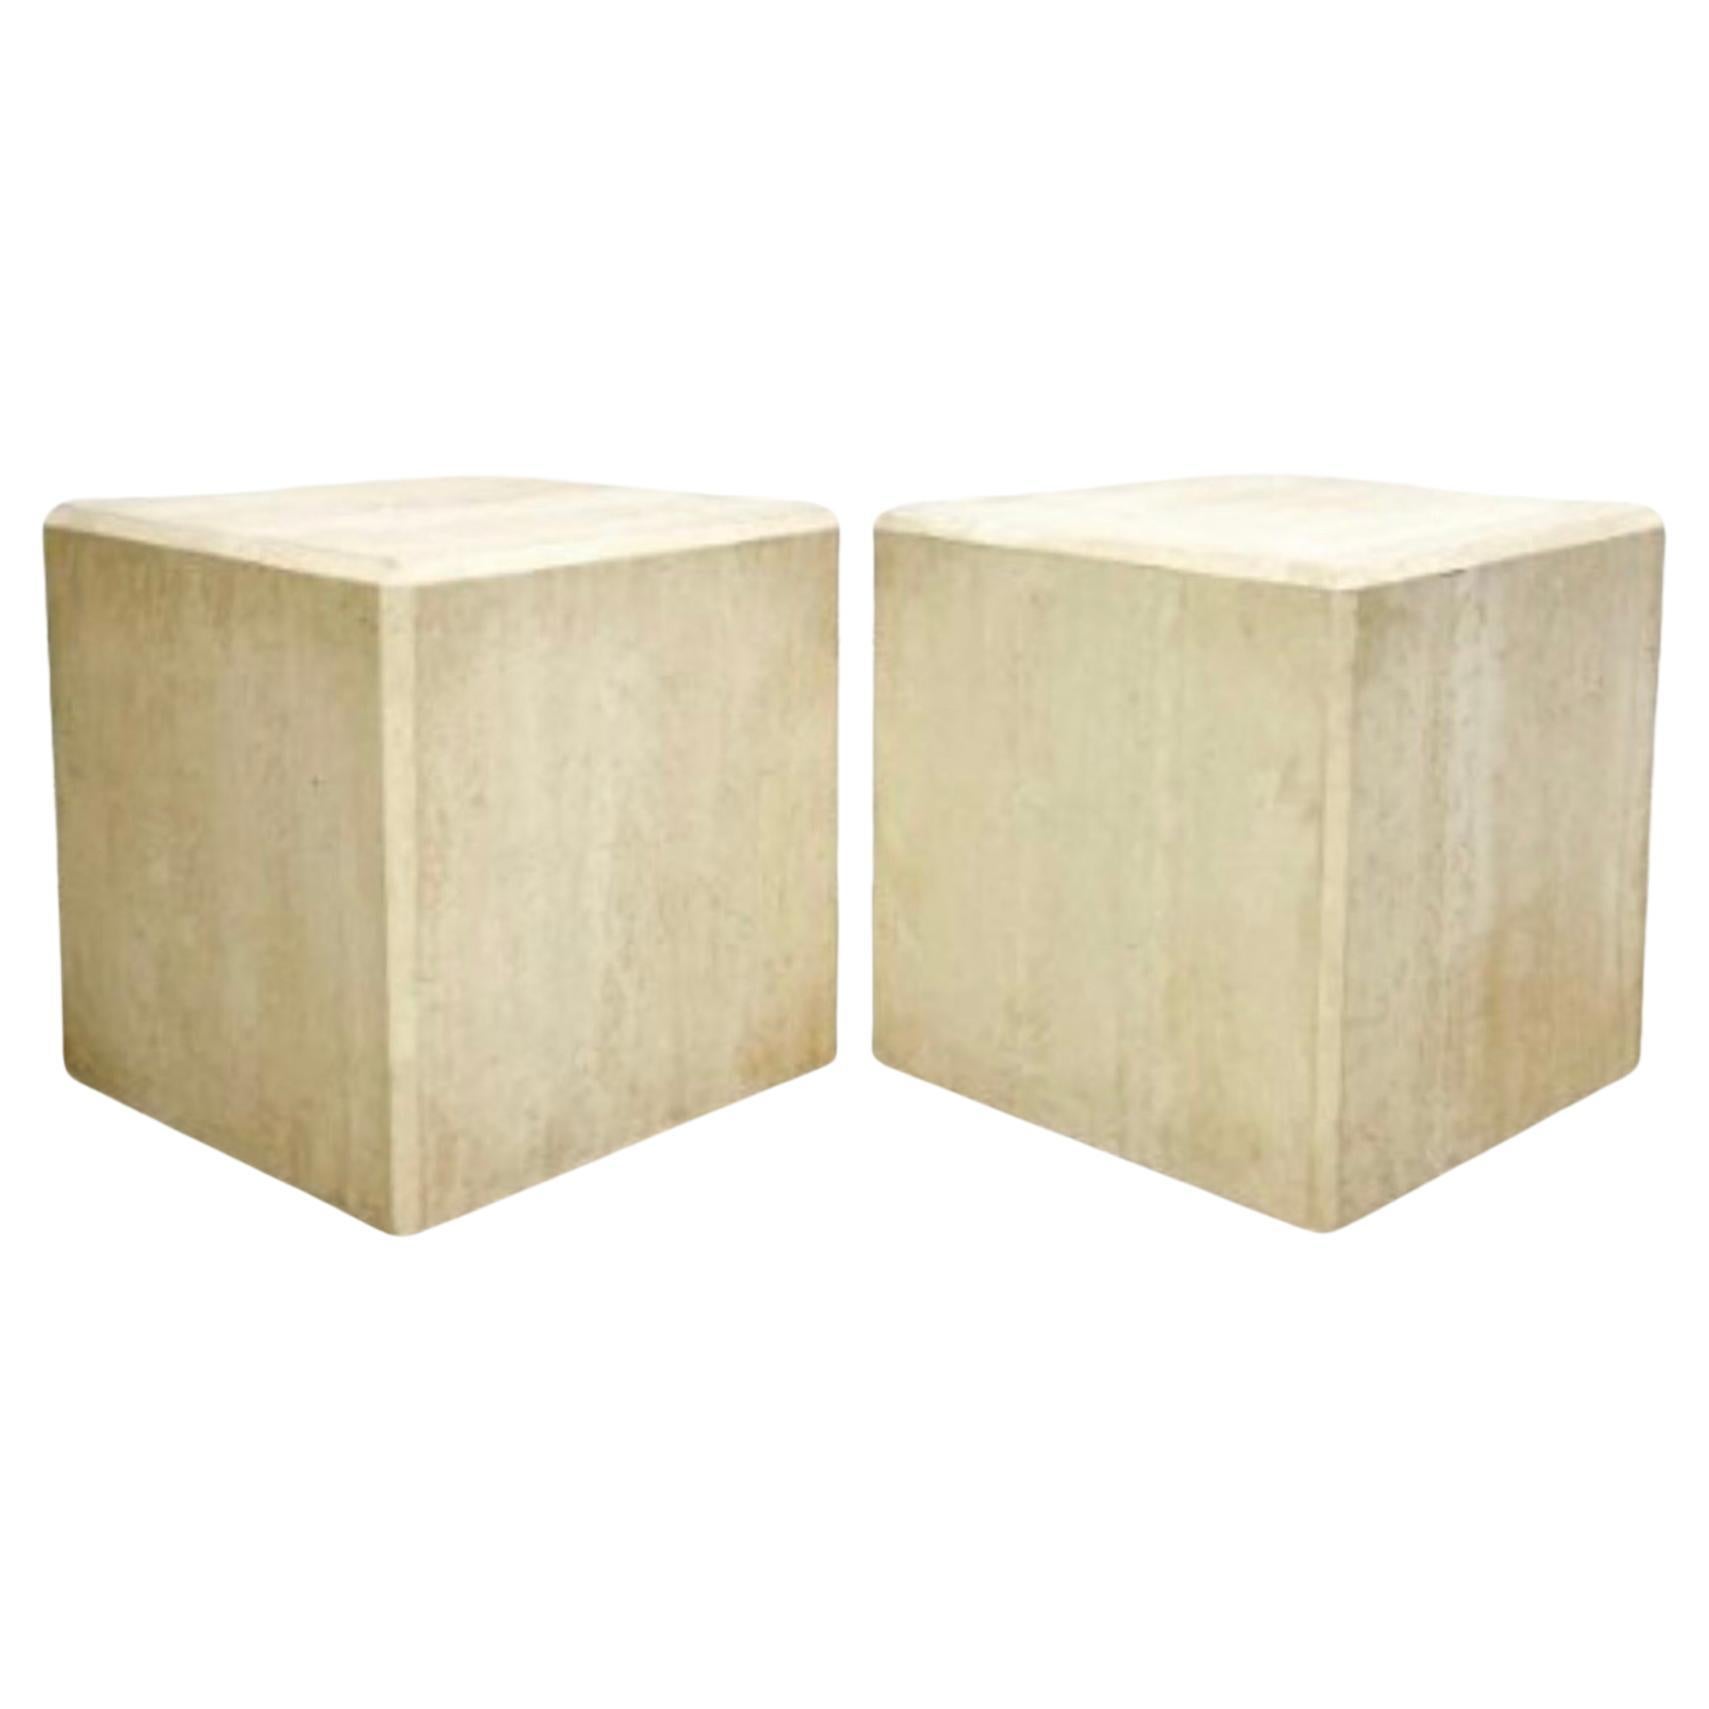 Large Scale Organic Modern Travertine Stone Side Or End Tables / Pedestals -Pair